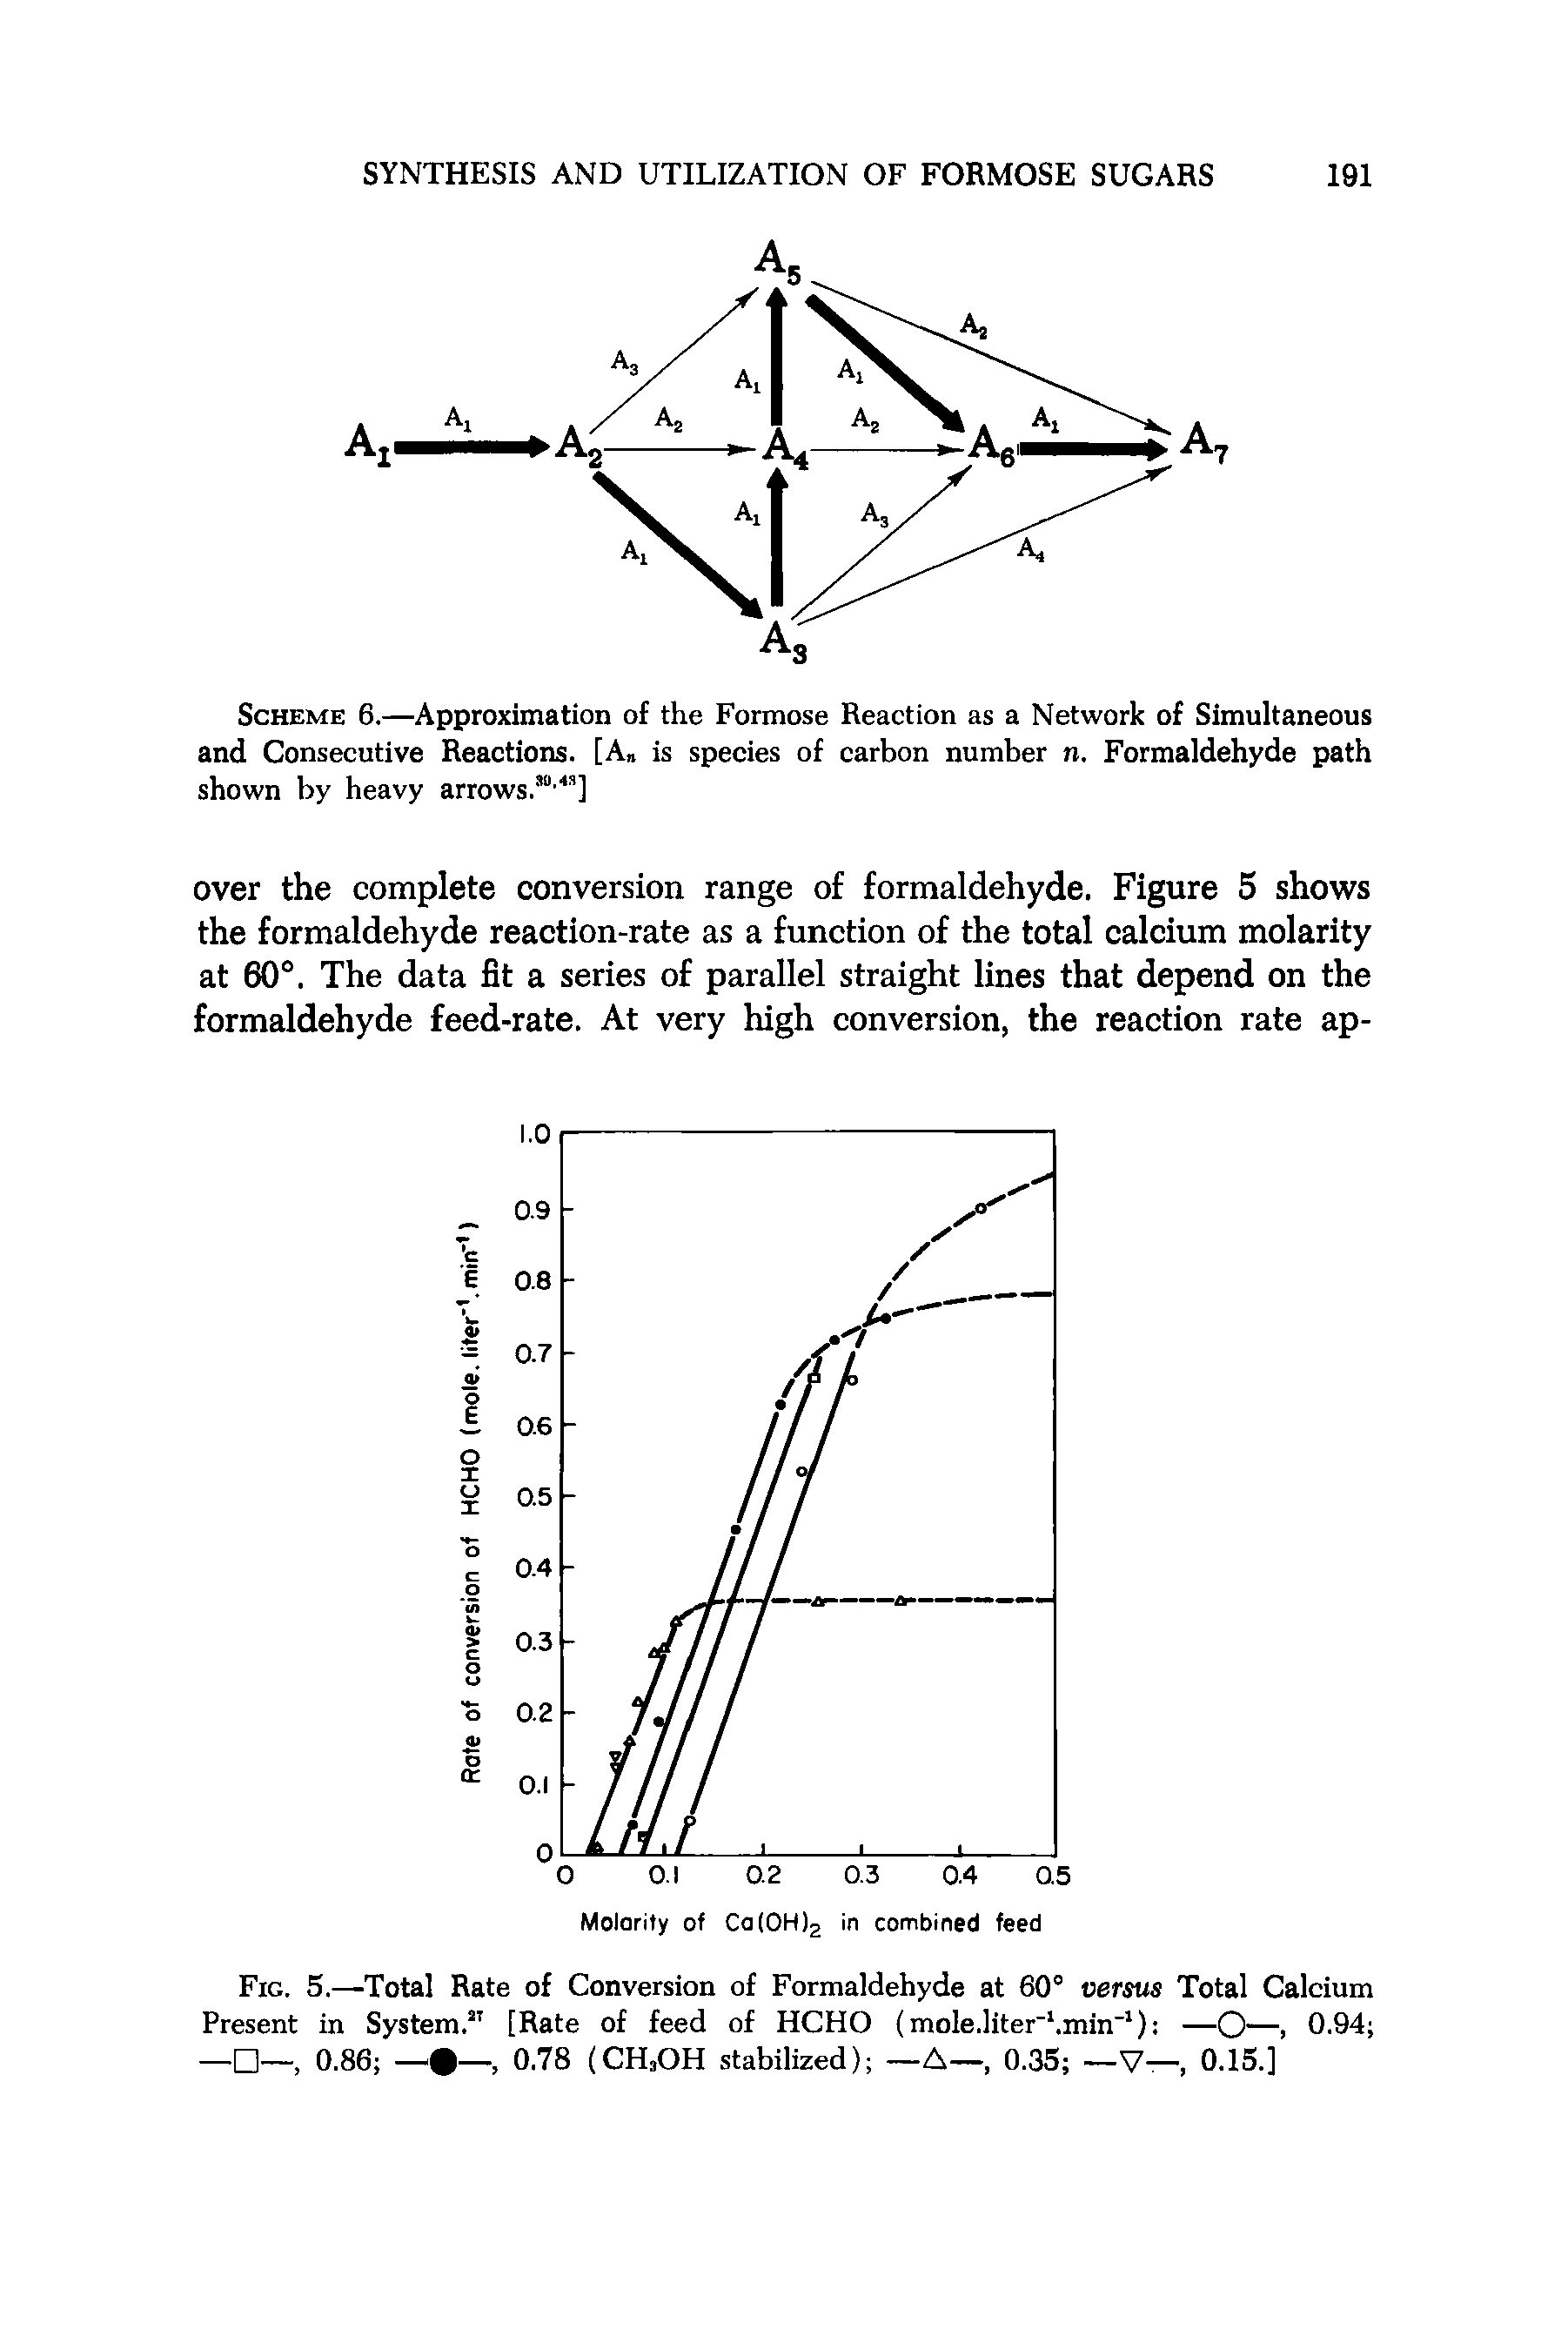 Scheme 6.—Approximation of the Formose Reaction as a Network of Simultaneous and Consecutive Reactions. [A is species of carbon number n. Formaldehyde path shown by heavy arrows. " ]...